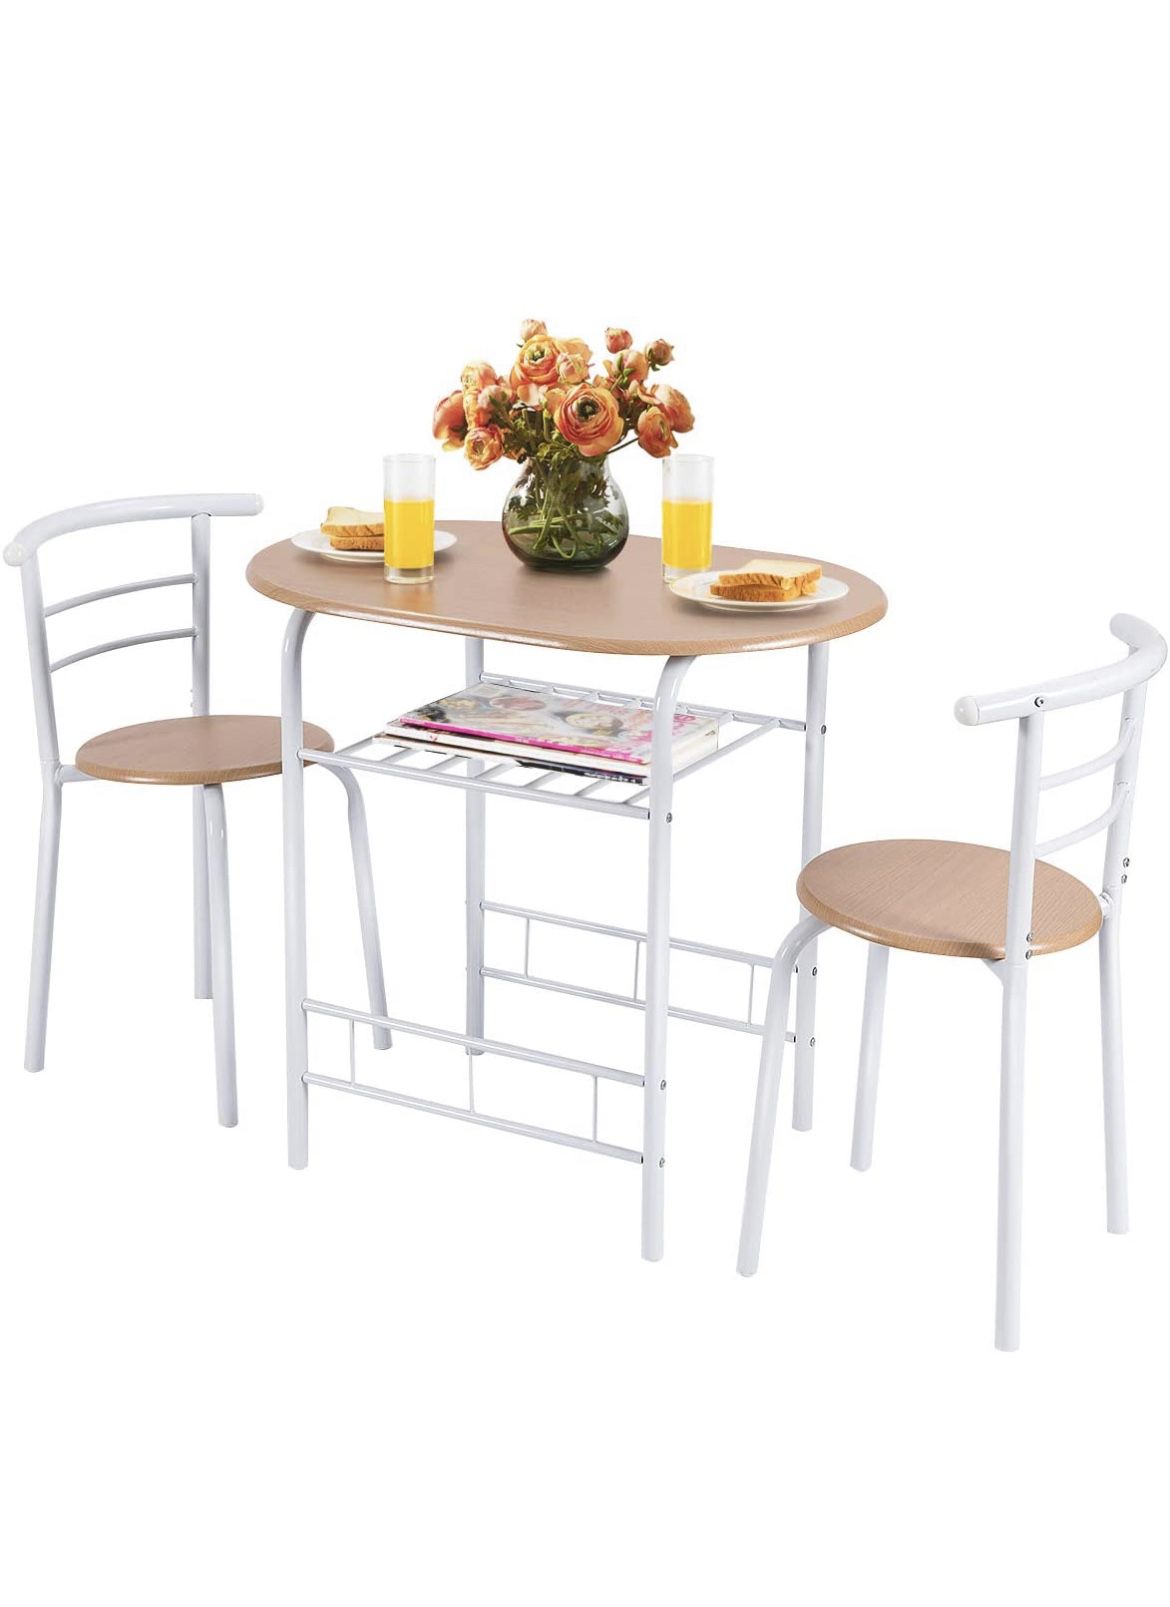 3 Piece Dining Set Compact 2 Chairs and Table Set 